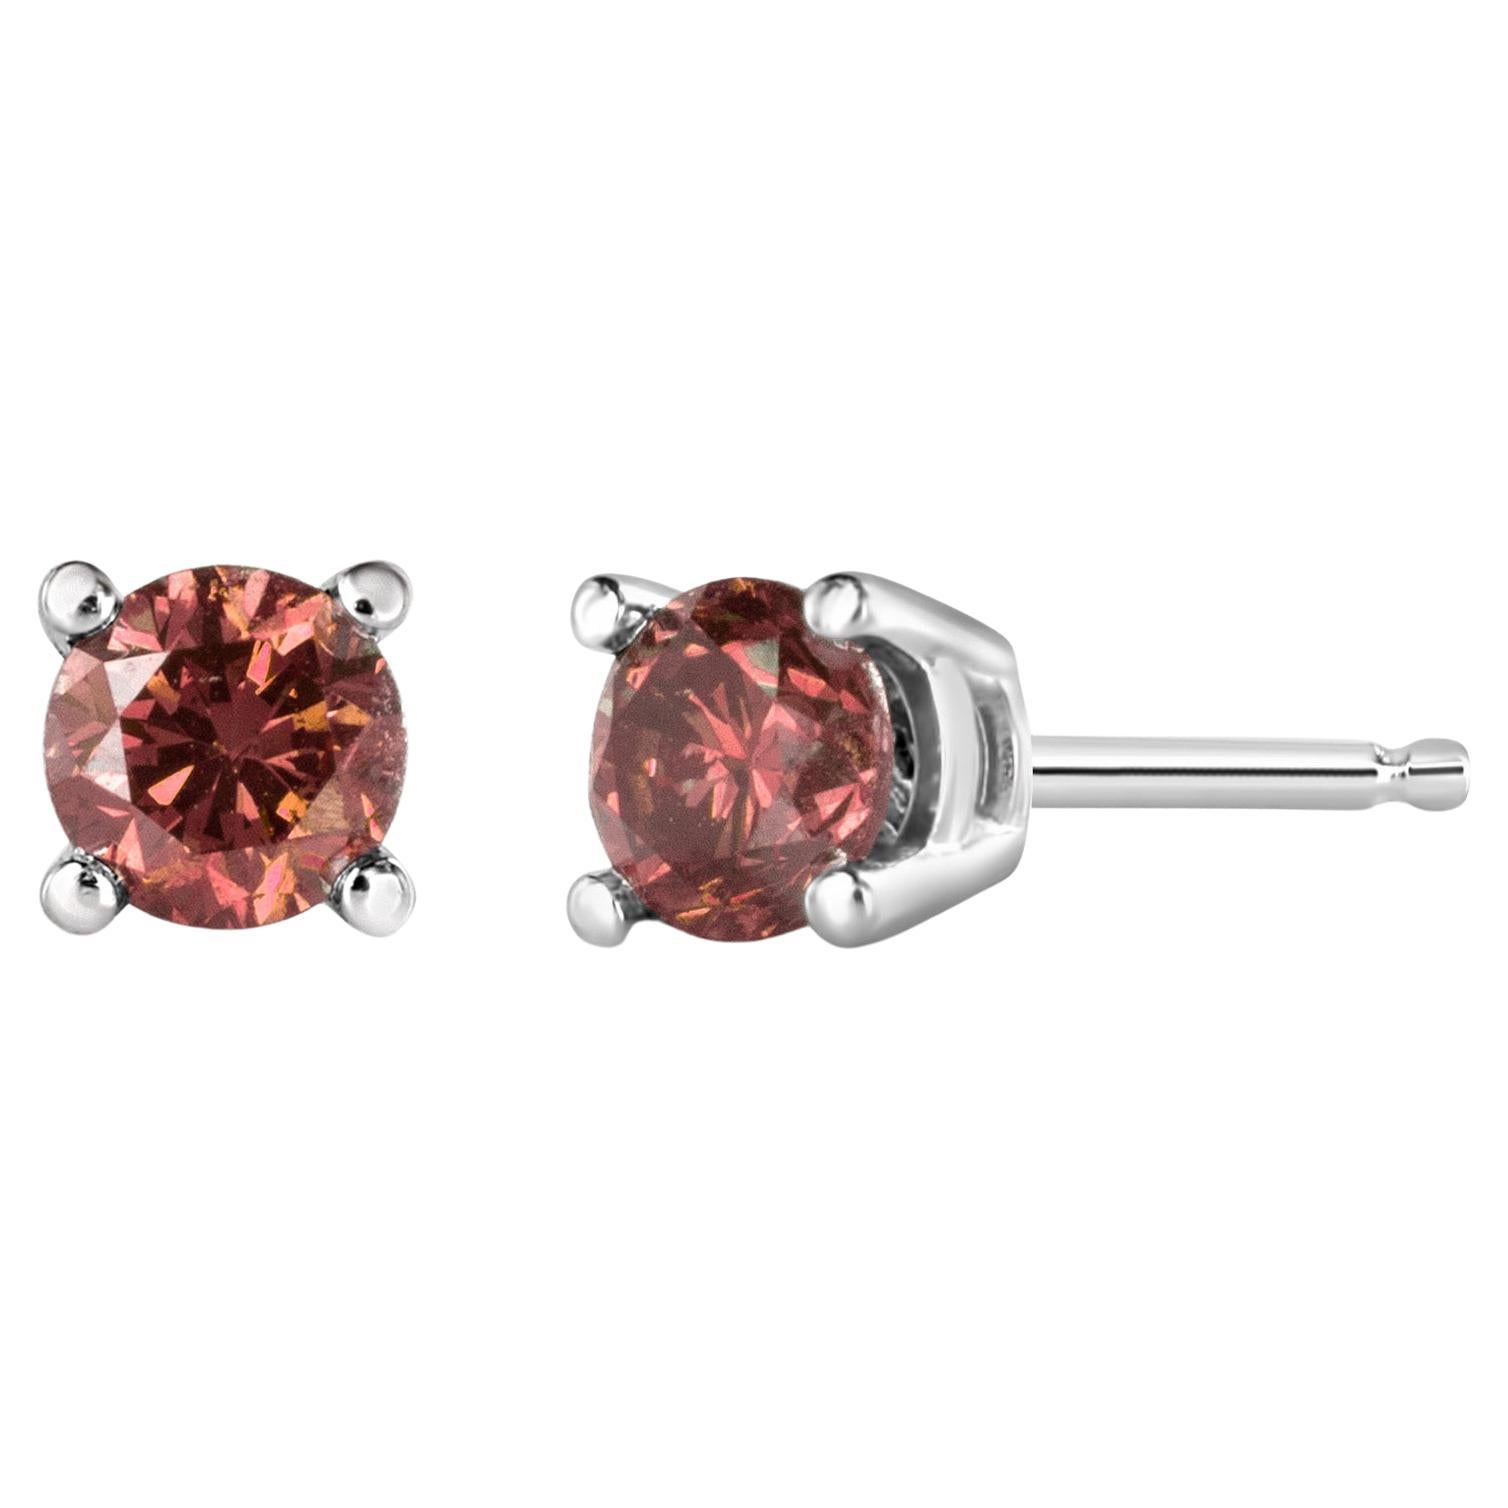 14K White Gold 1/3 Carat Round Brilliant-Cut Pink Diamond Solitaire Stud Earring